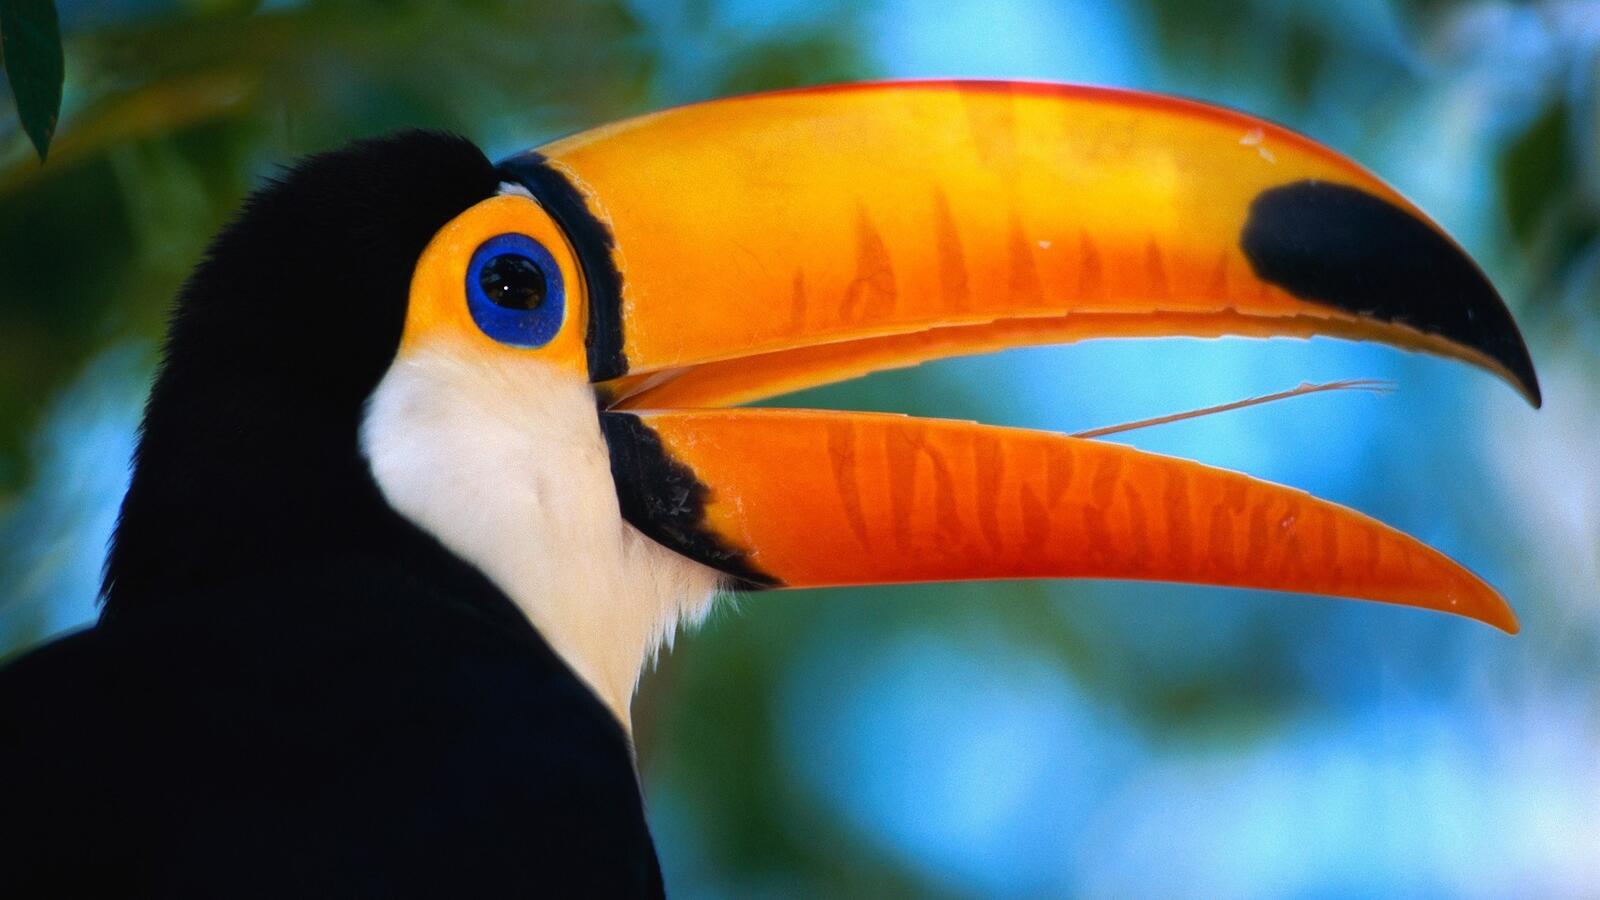 Free photo A toucan bird with a big brightly colored beak.